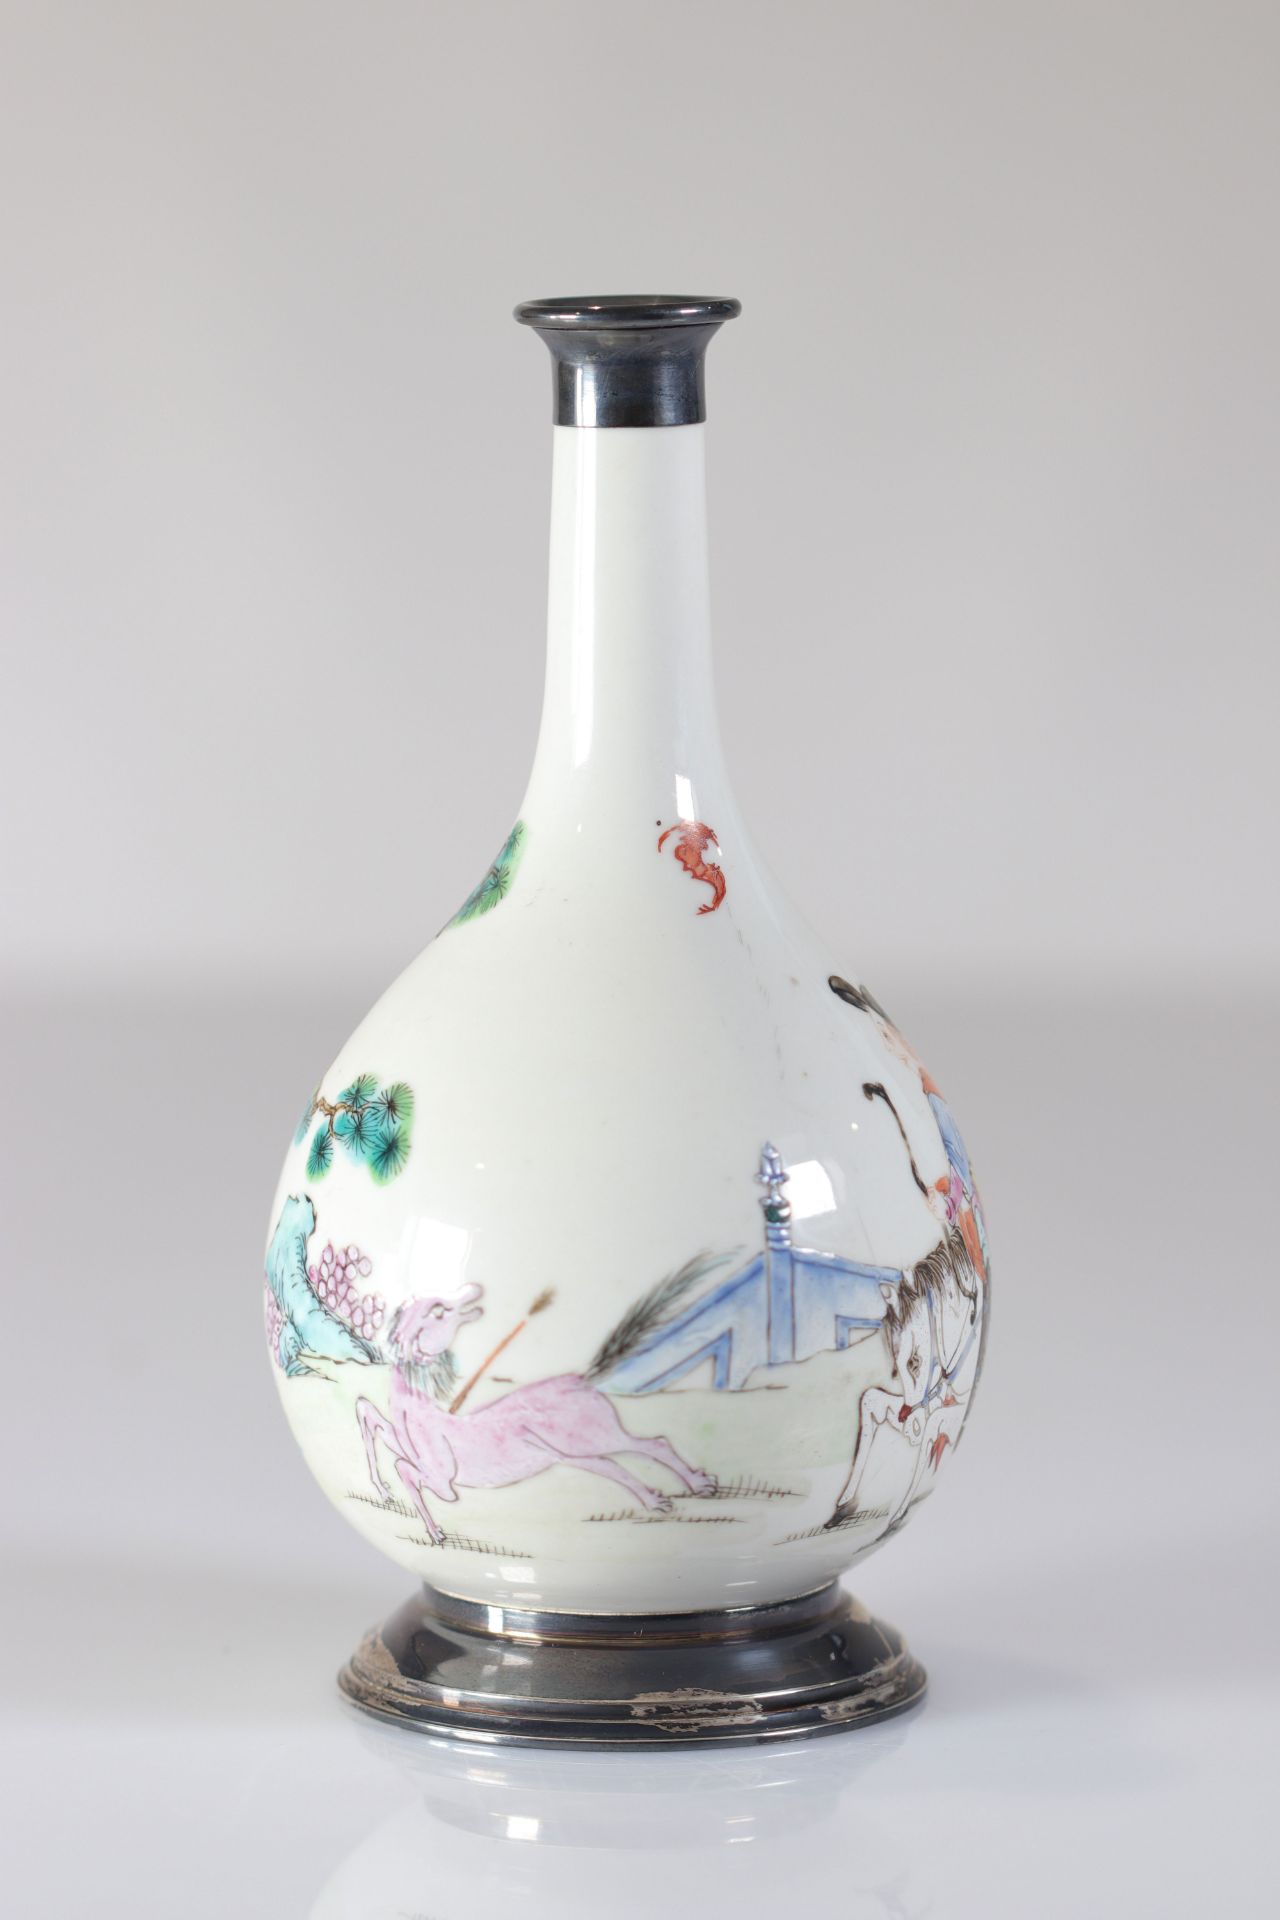 Famille rose porcelain vase decorated with a rider "foot mounted on silver" - Image 3 of 5